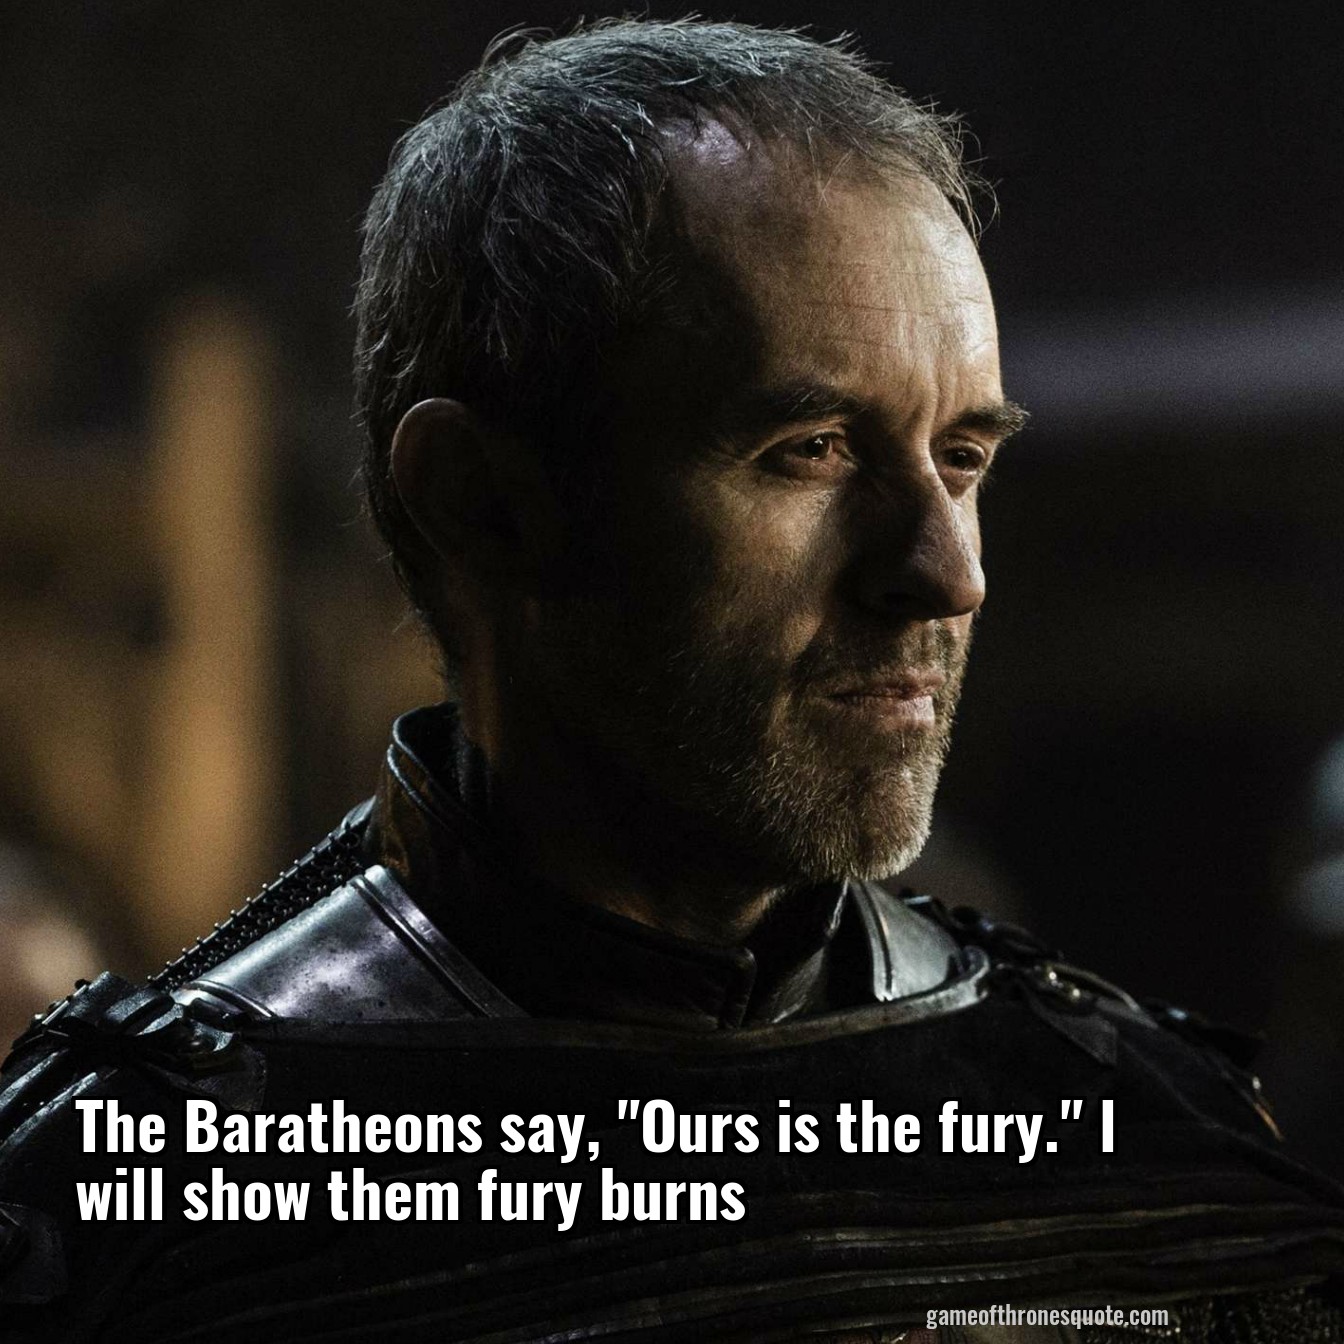 The Baratheons say, "Ours is the fury." l will show them fury burns